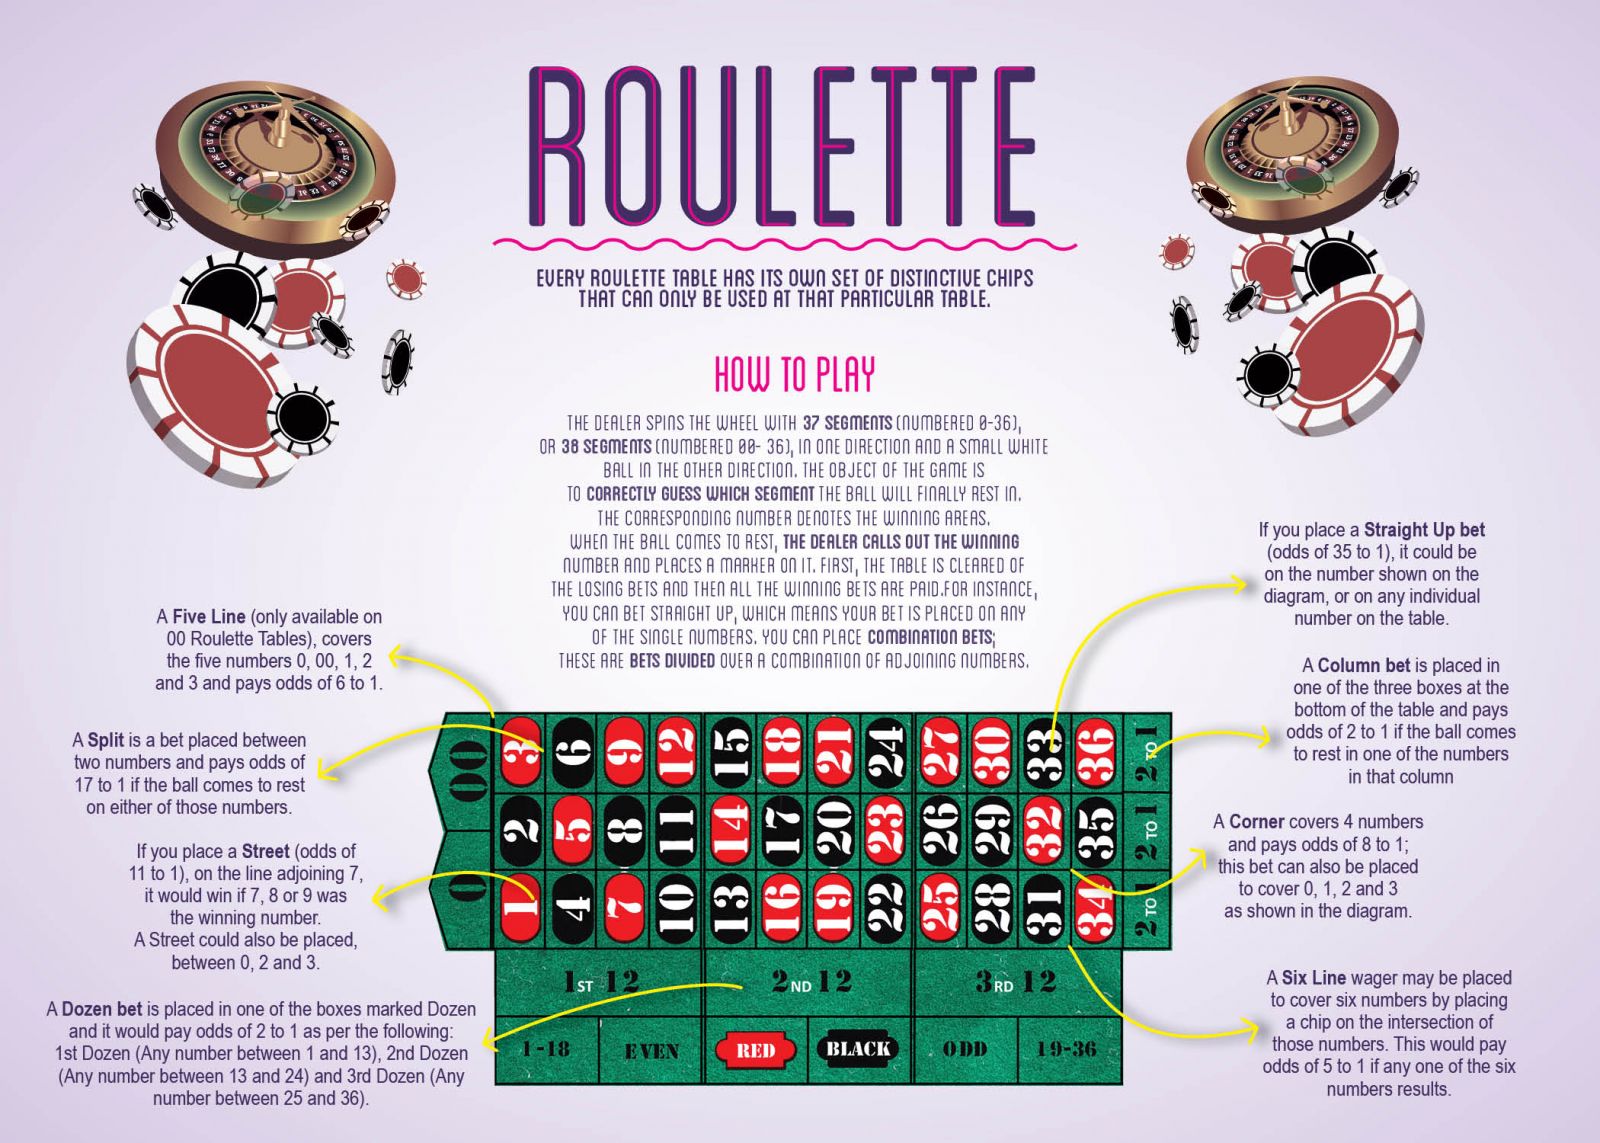 How To Play Roulette - Roulette Rules and Bet Types